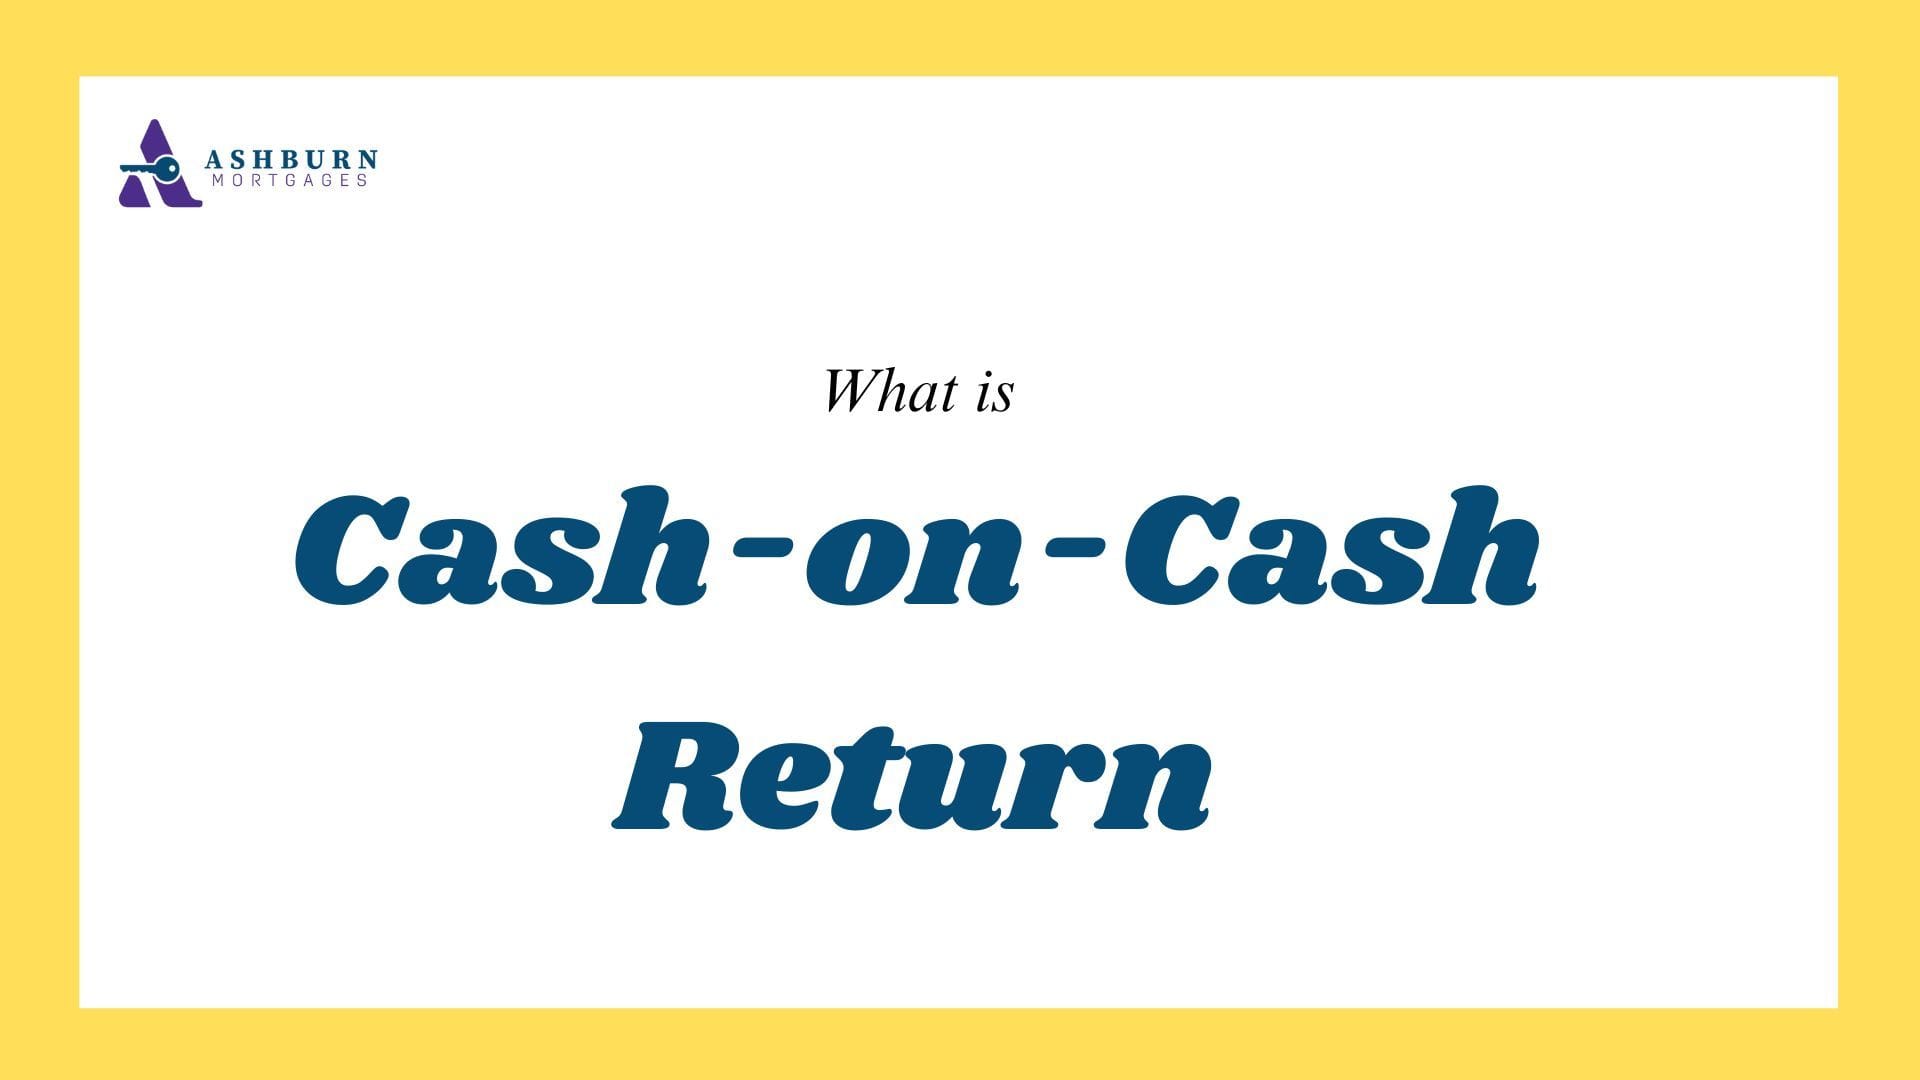 Investment Property – What is Cash-on-Cash return